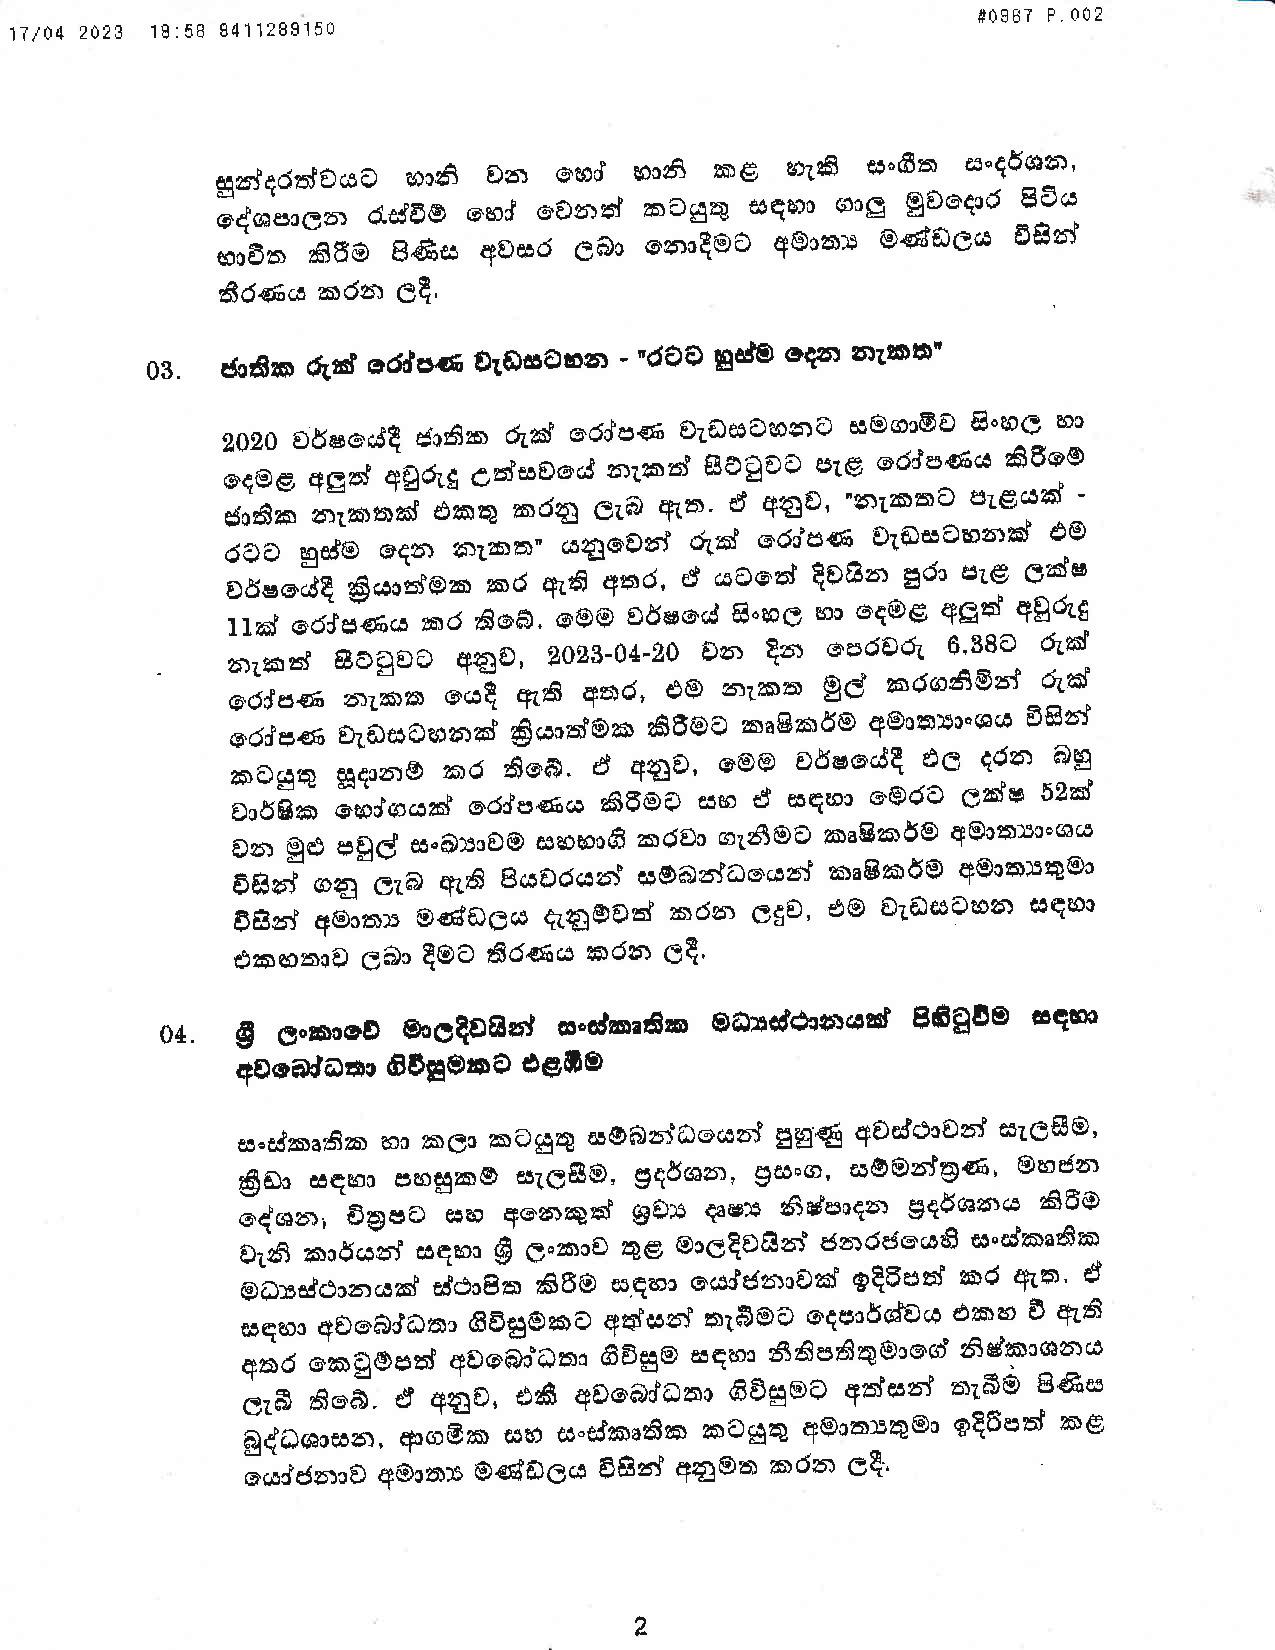 Cabinet Decisions on 17.04.2023 page 002